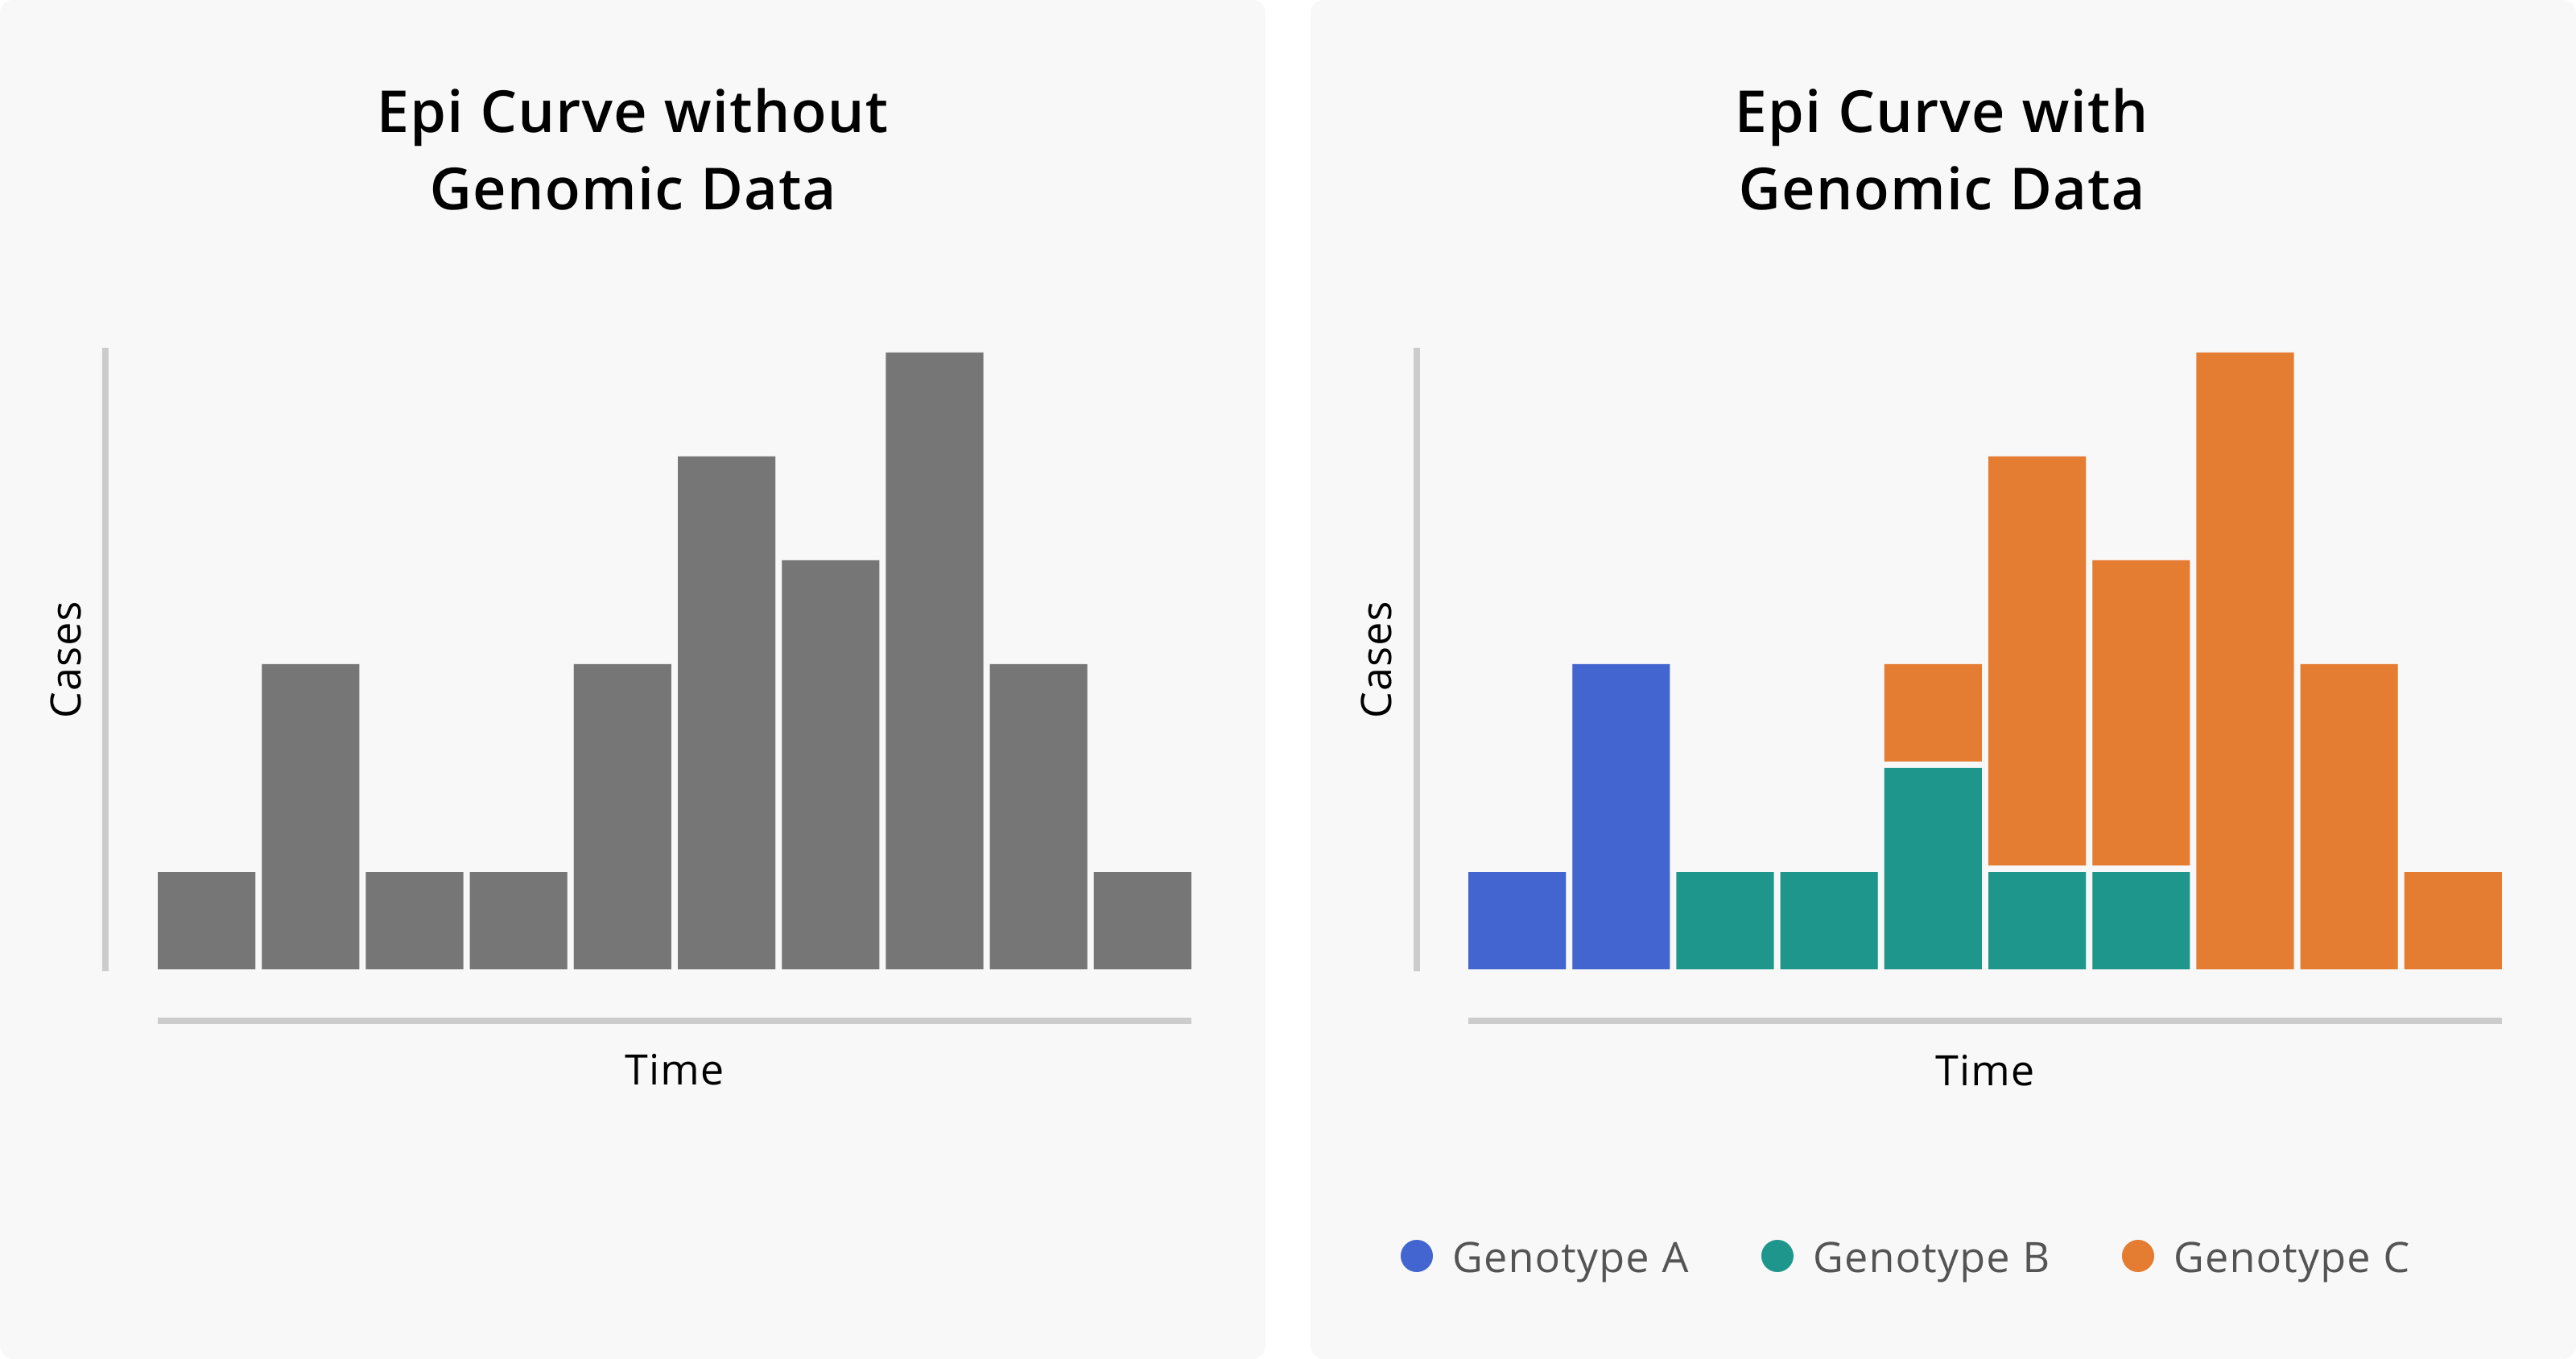 Epidemiologic curves without and with the addition of genomic data. On the left we see the epi curve without genomic information. Given just the shape of the curve, we might infer that this outbreak started from a single introduction event with some degree of sustained transmission. On the right we see the same epi curve, but with cases coloured according to their genotype. The addition of genomic data suggests that in fact this outbreak is attributable to three distinct introduction events of divergent genotypes, and that these different genotypes contributed in different degrees to the overall outbreak.